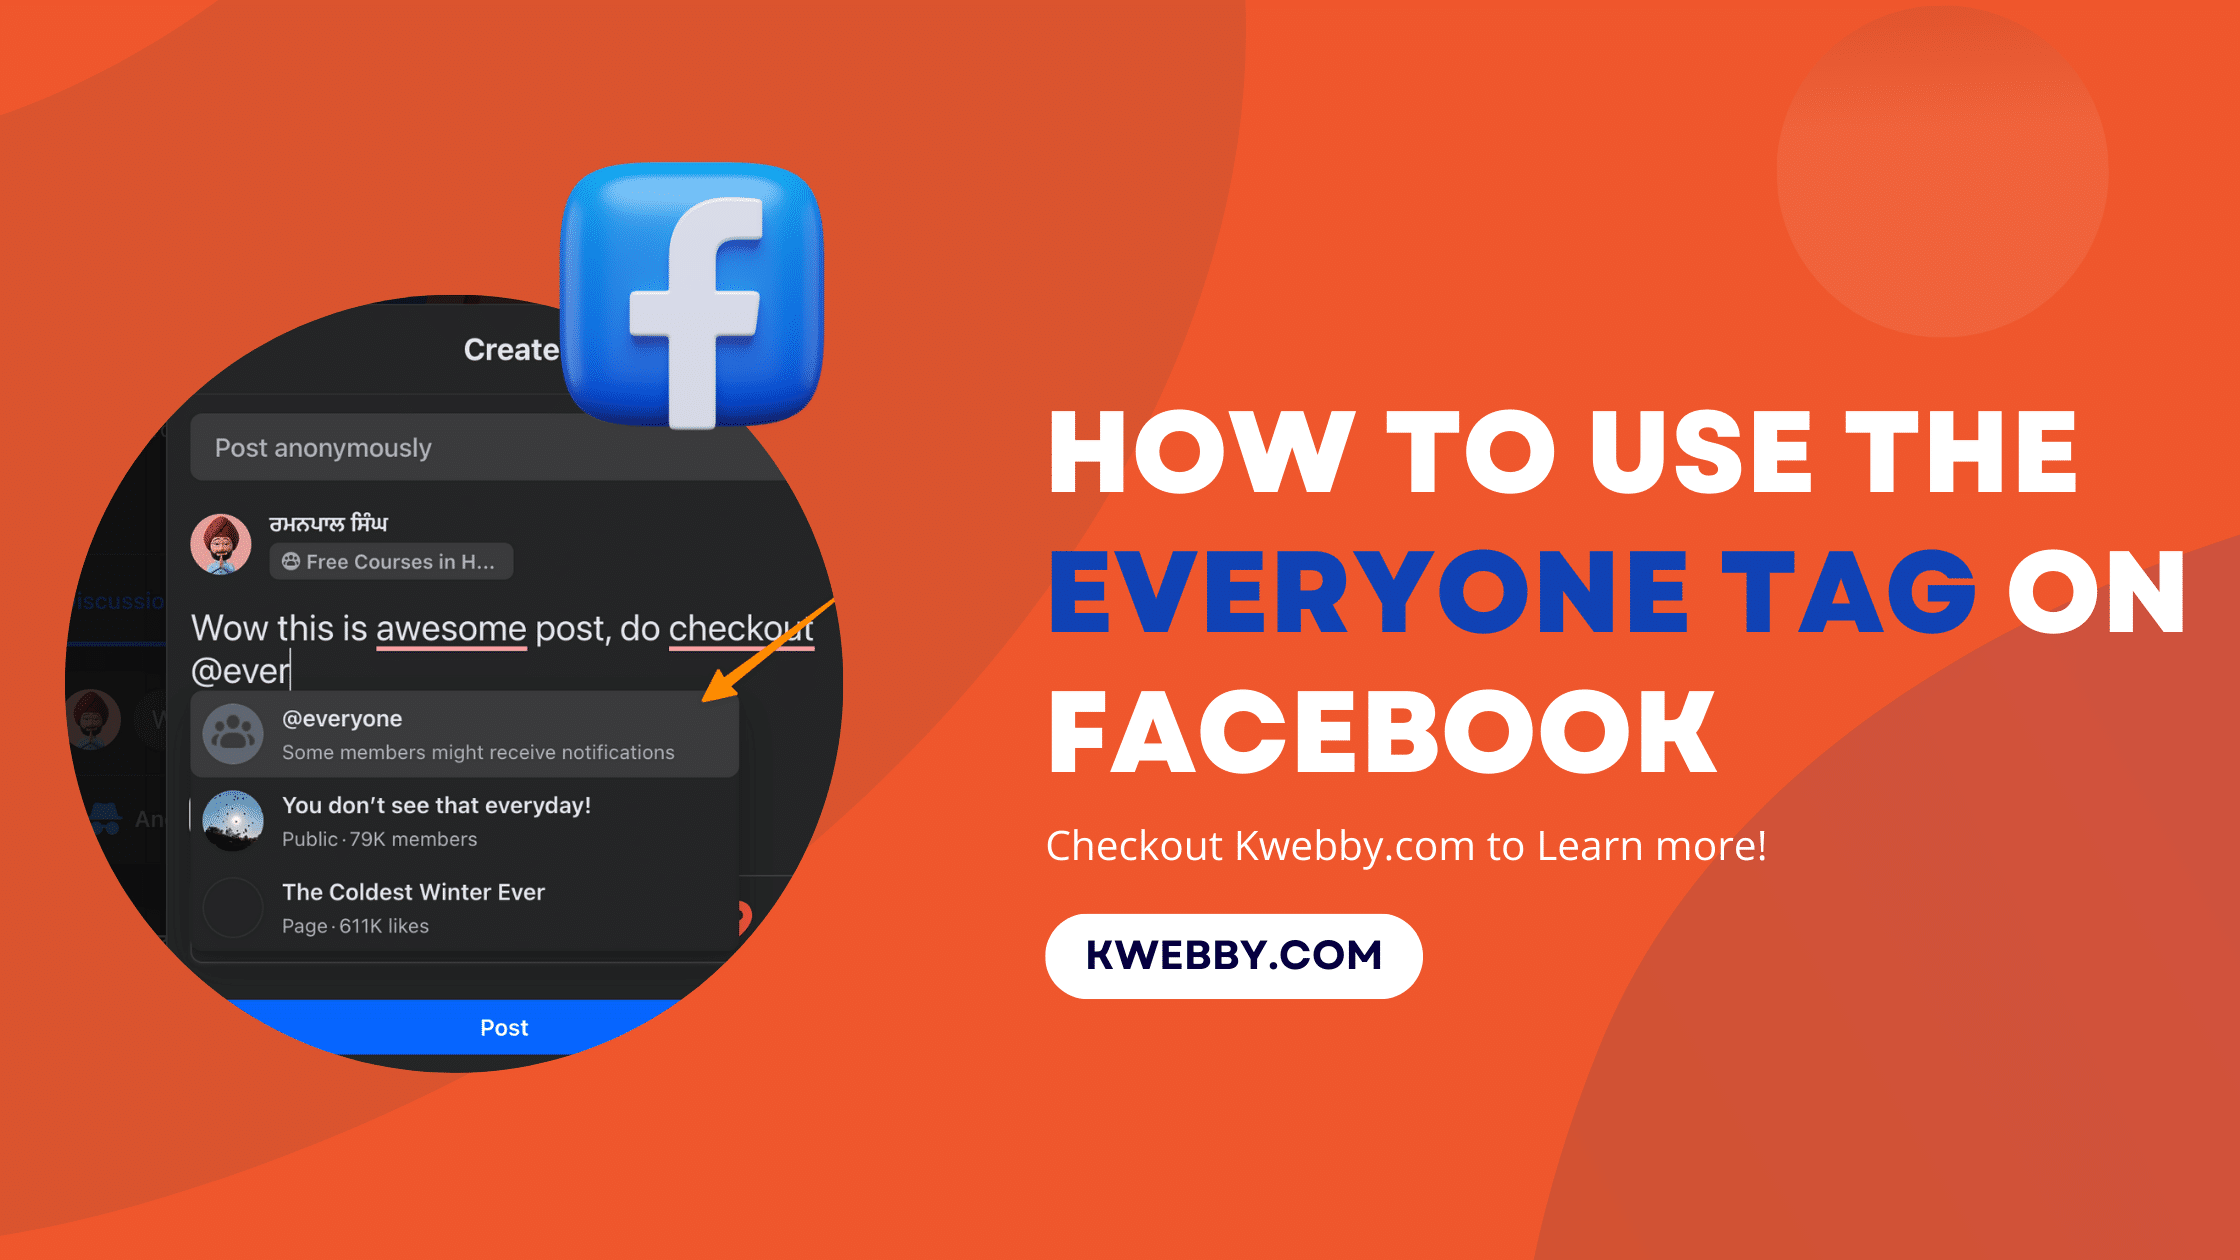 How to Use the Everyone Tag on Facebook